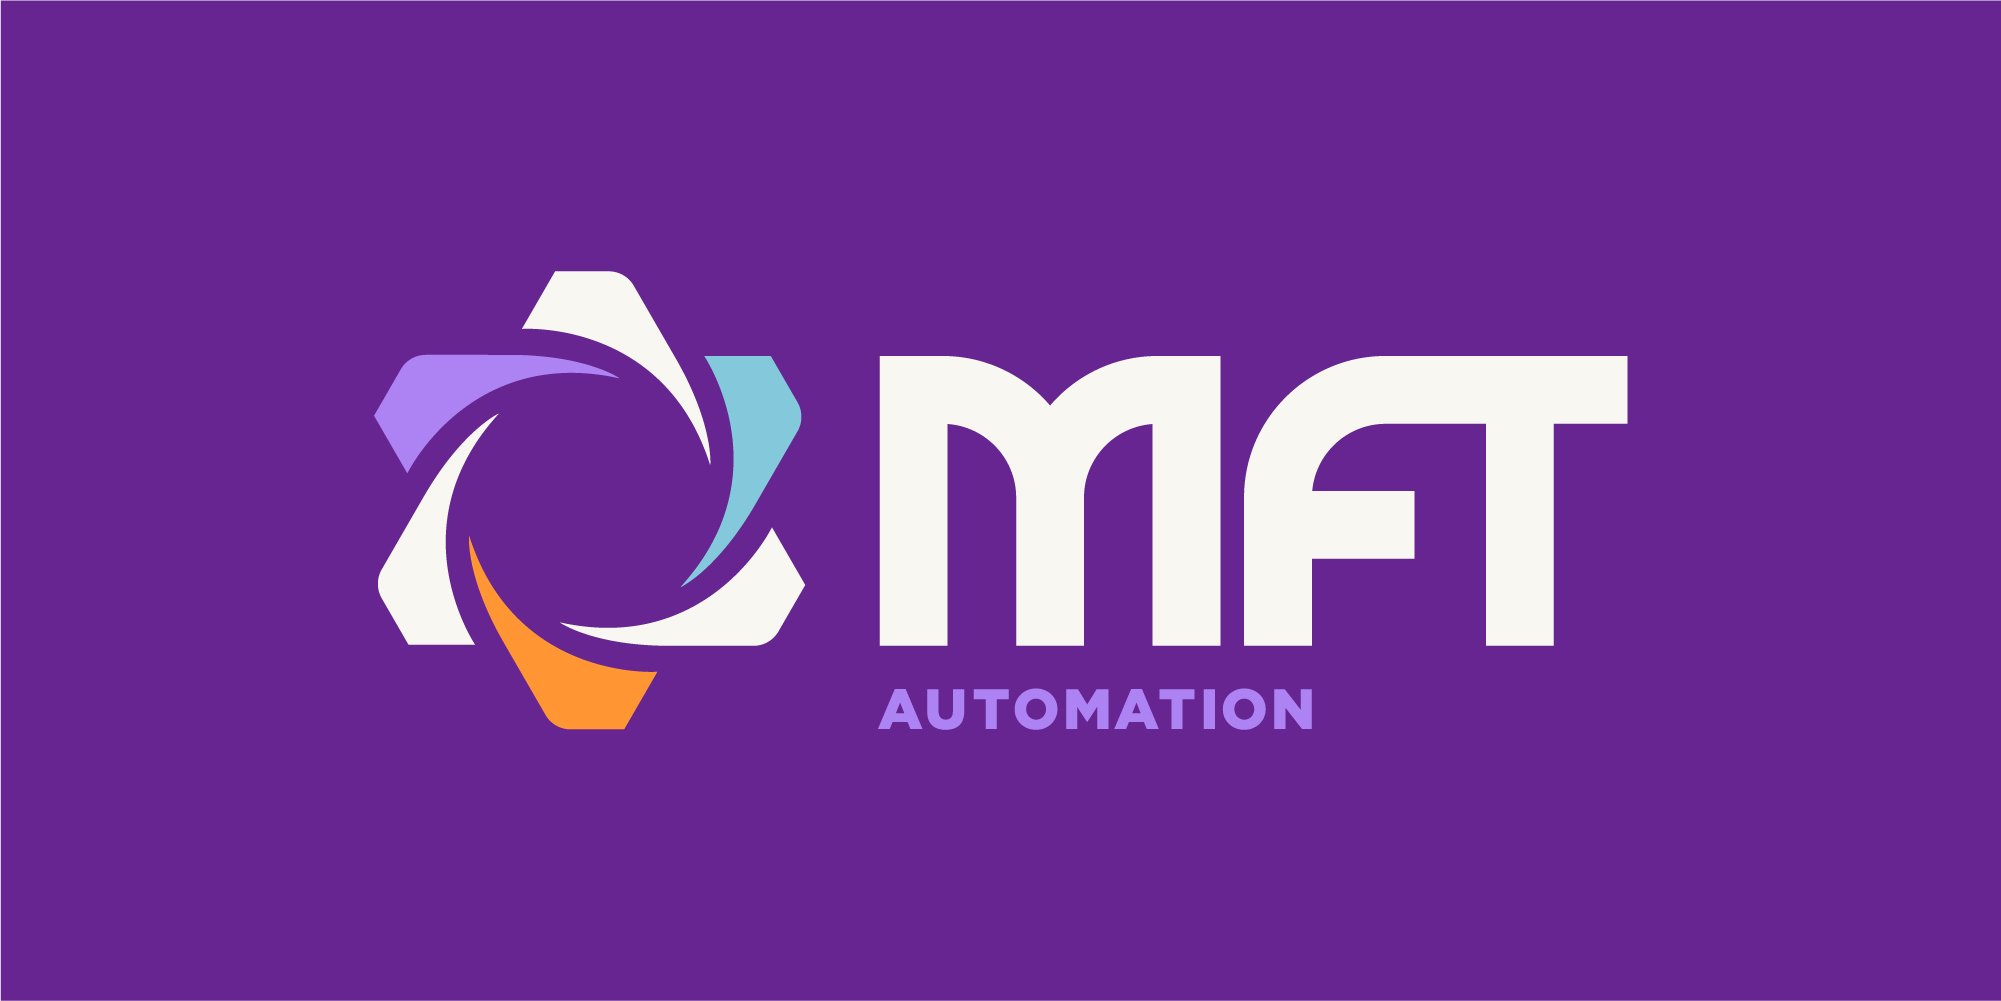 The new MFT Automation Logo. Featuring a cog-like spiral and the words MFT Automation.